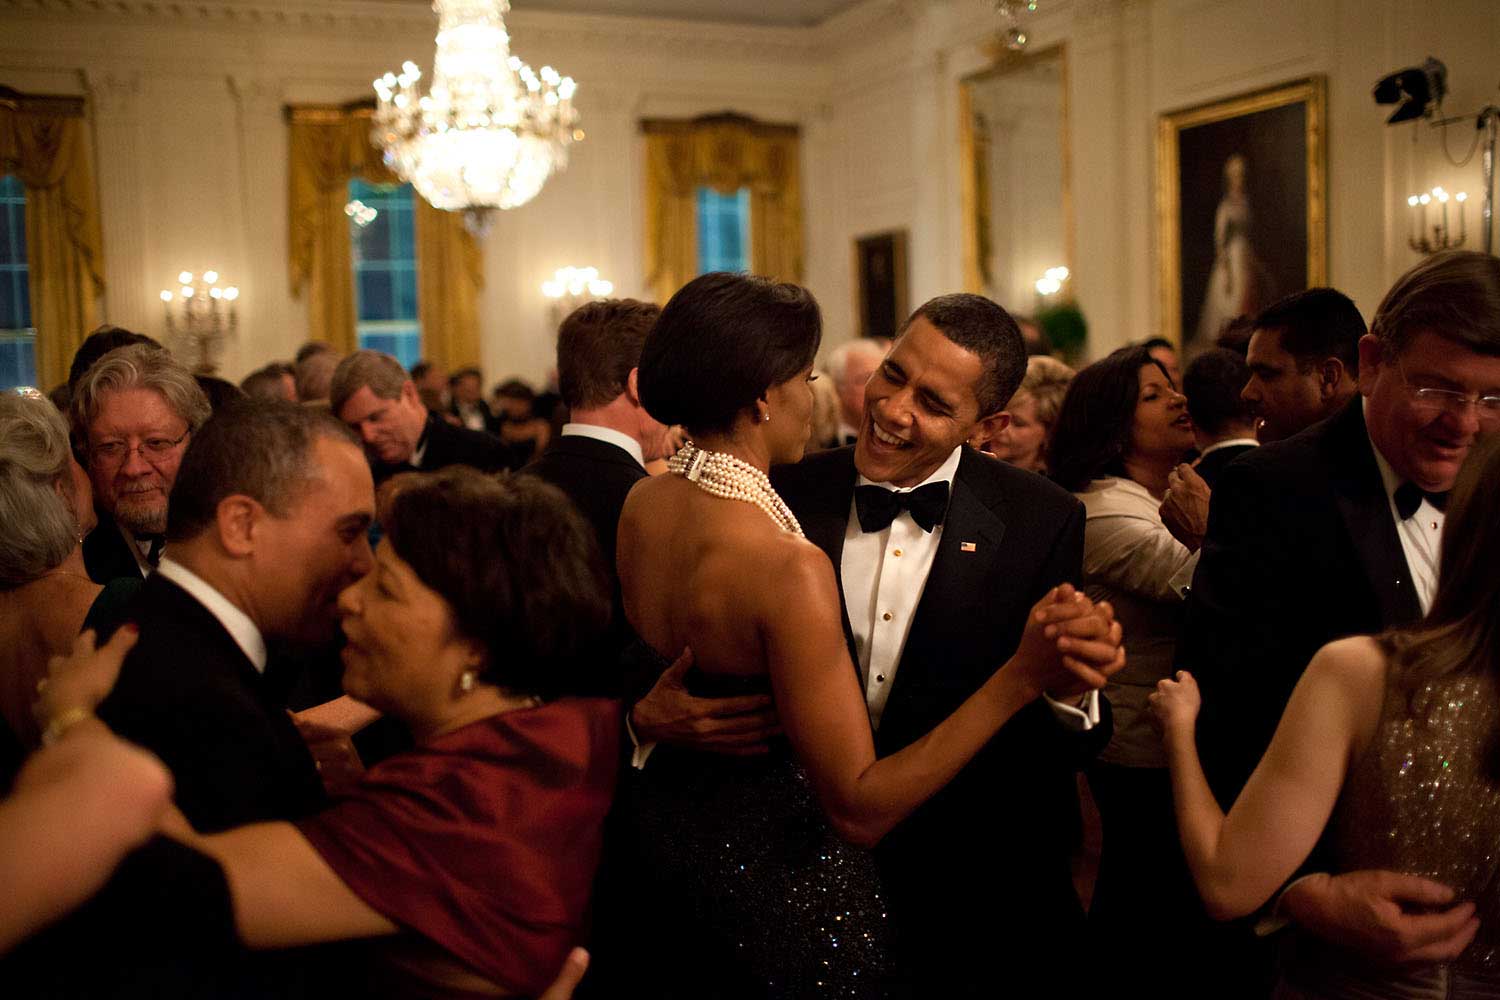 The President dances with his wife while singing along with the band Earth, Wind & Fire during the Governors Ball, his first formal function at the White House, on Feb. 22, 2009